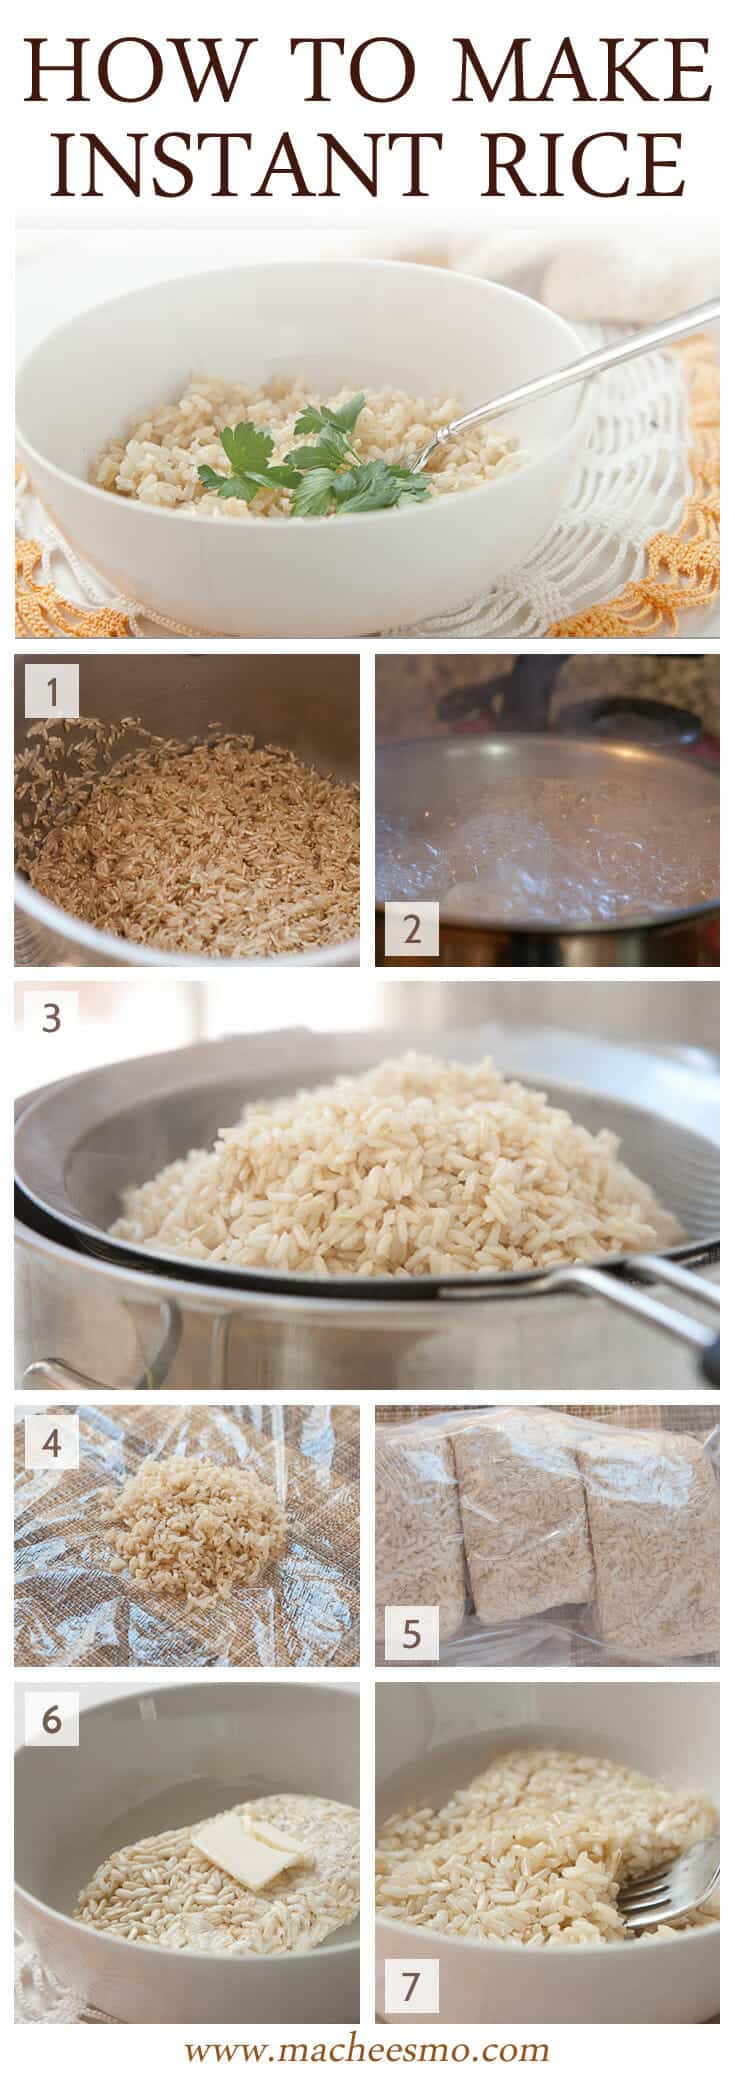 Instant Rice At Home: The trick and tutorial for making excellent instant rice at home. I like to use brown rice. Cook a big batch, store it correctly, and reheat it in minutes!